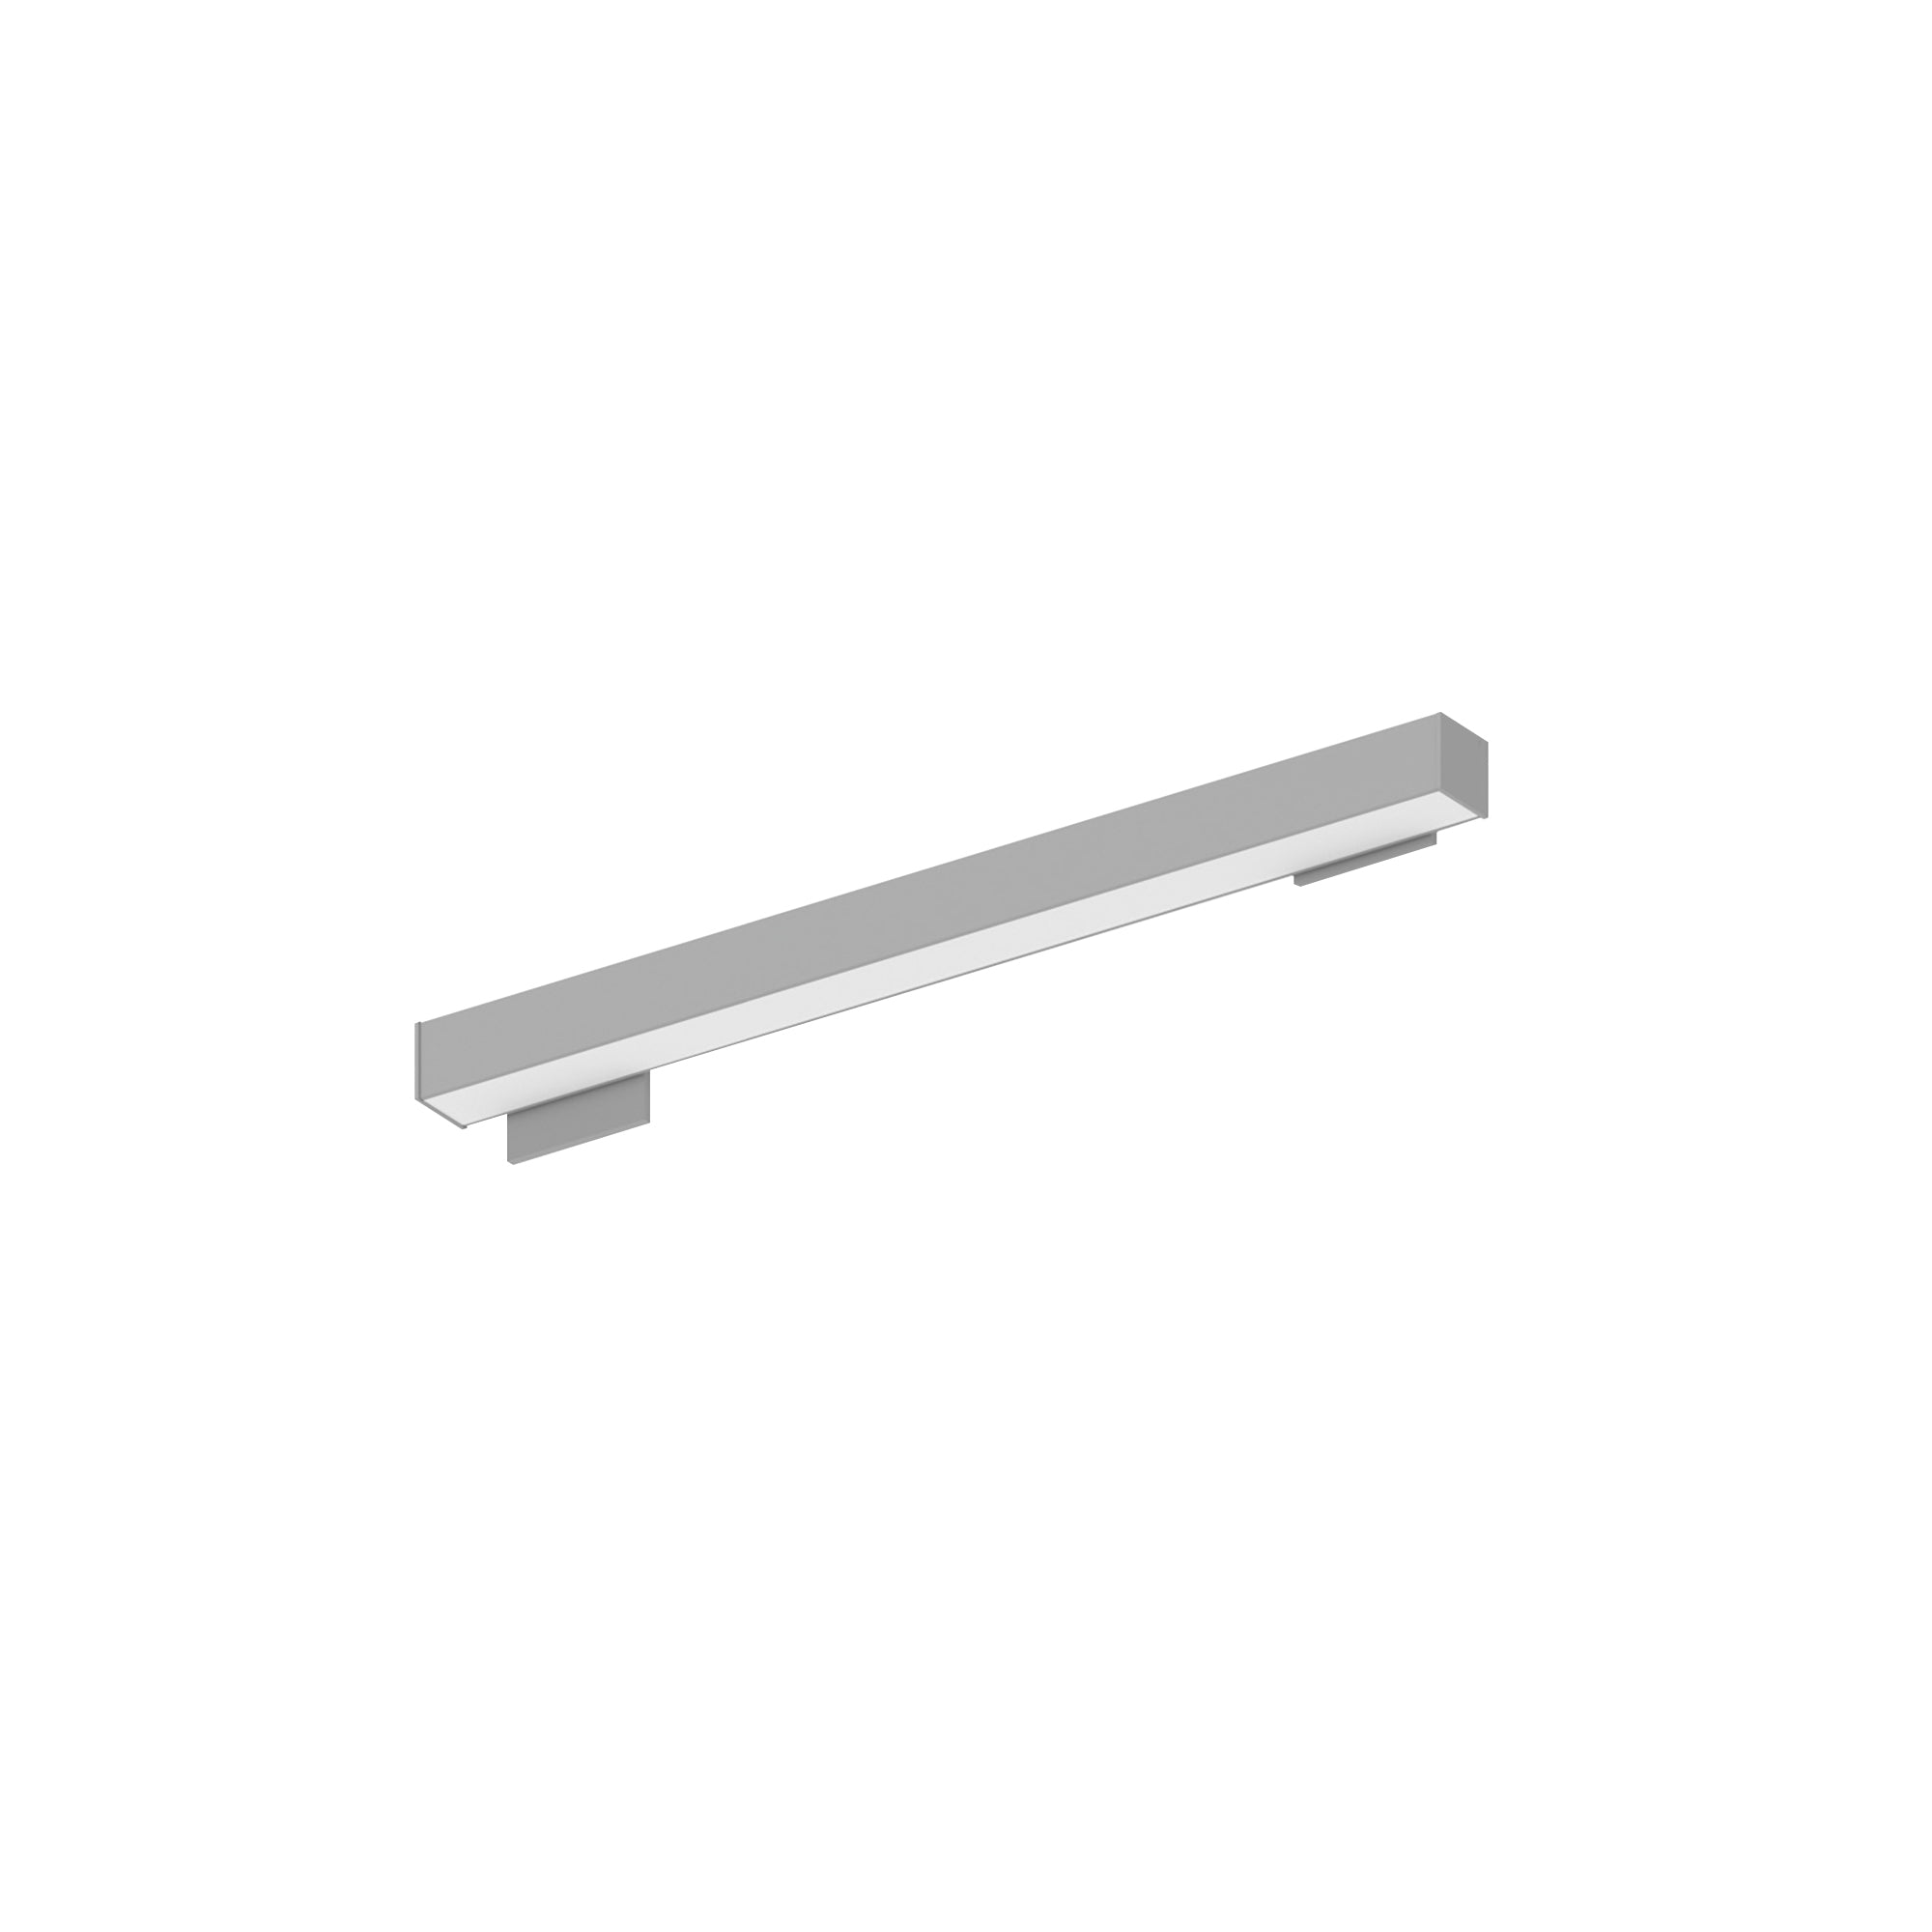 Nora Lighting NWLIN-21040A/L4-R2 - Linear - 2' L-Line LED Wall Mount Linear, 2100lm / 4000K, 4 Inchx4 Inch Left Plate & 2 Inchx4 Inch Right Plate, Aluminum Finish